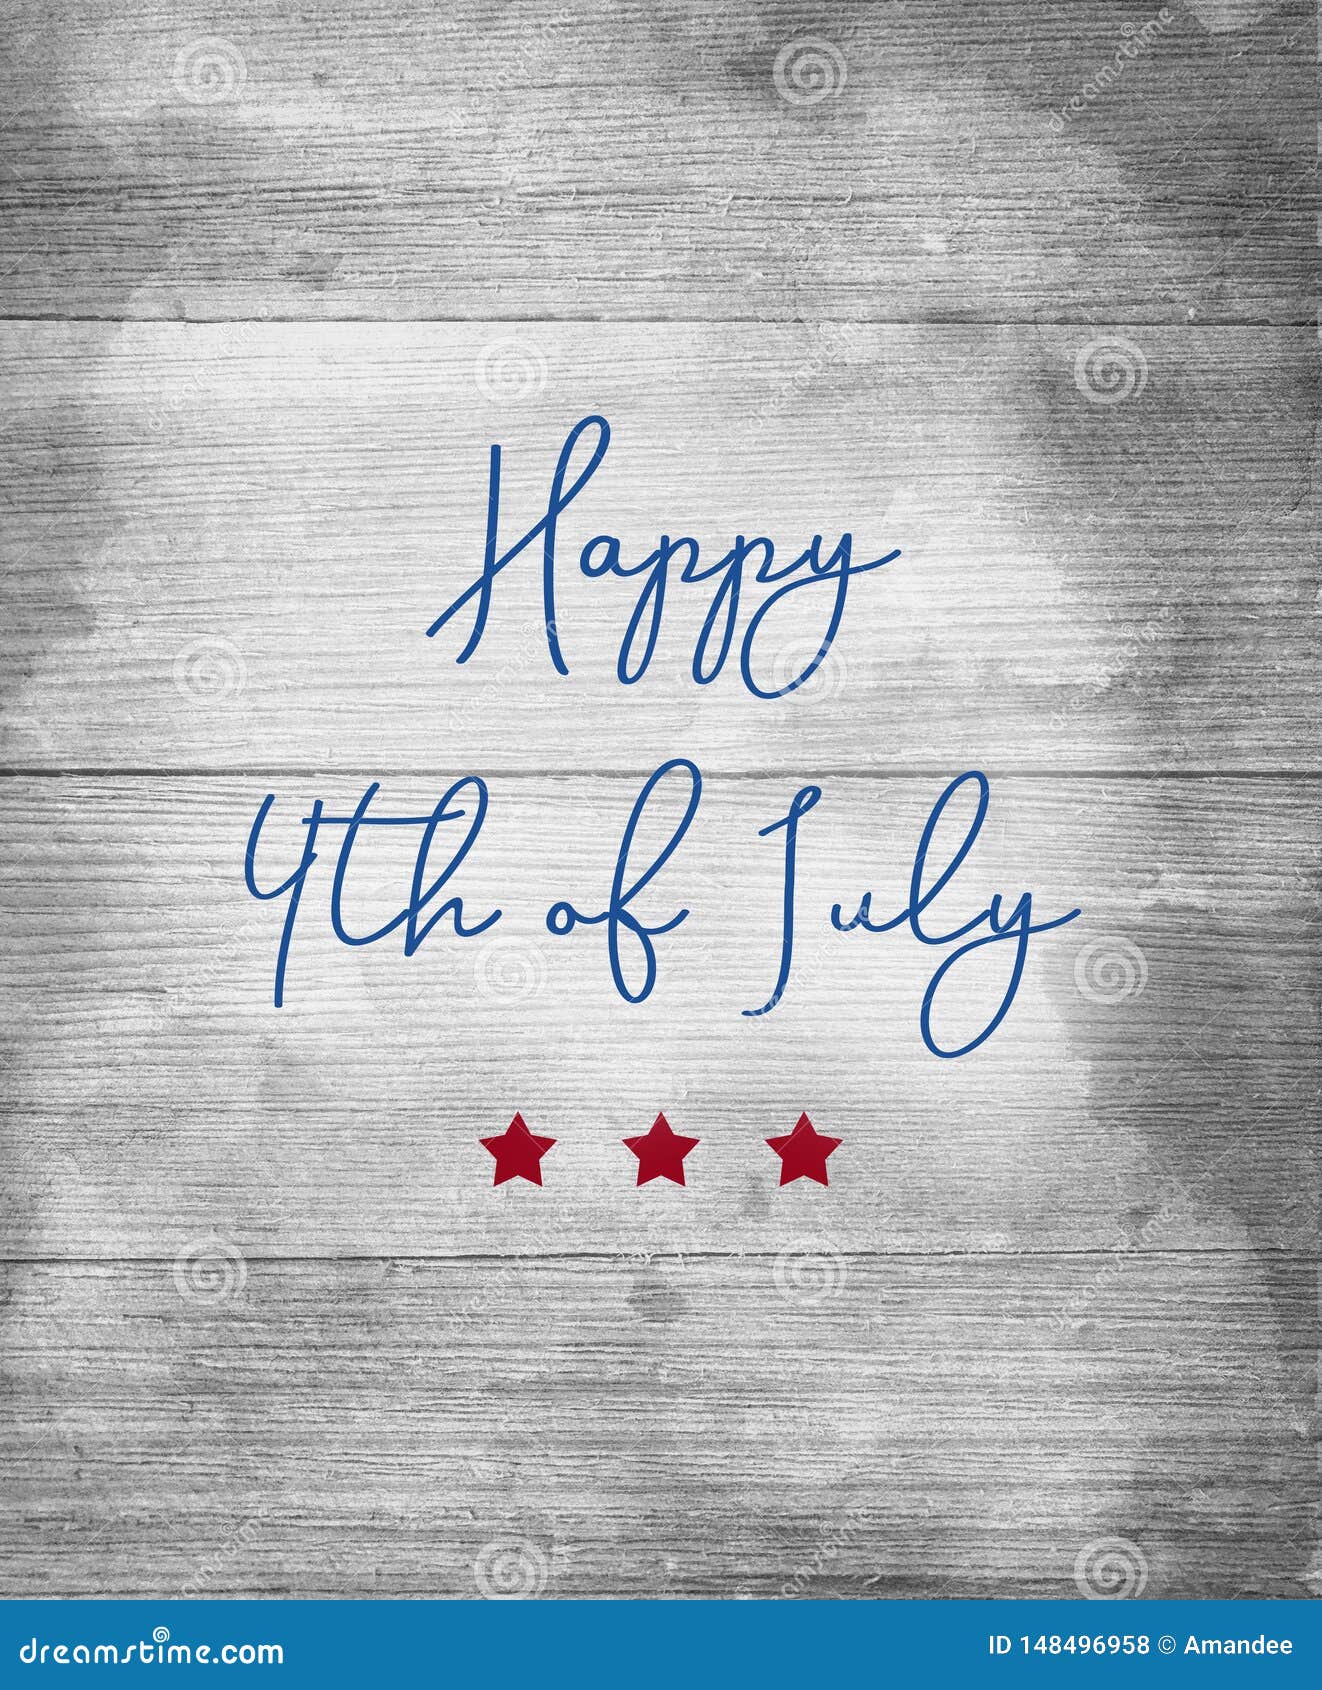 happy 4th of july sign in blue letters with red stars on wood background